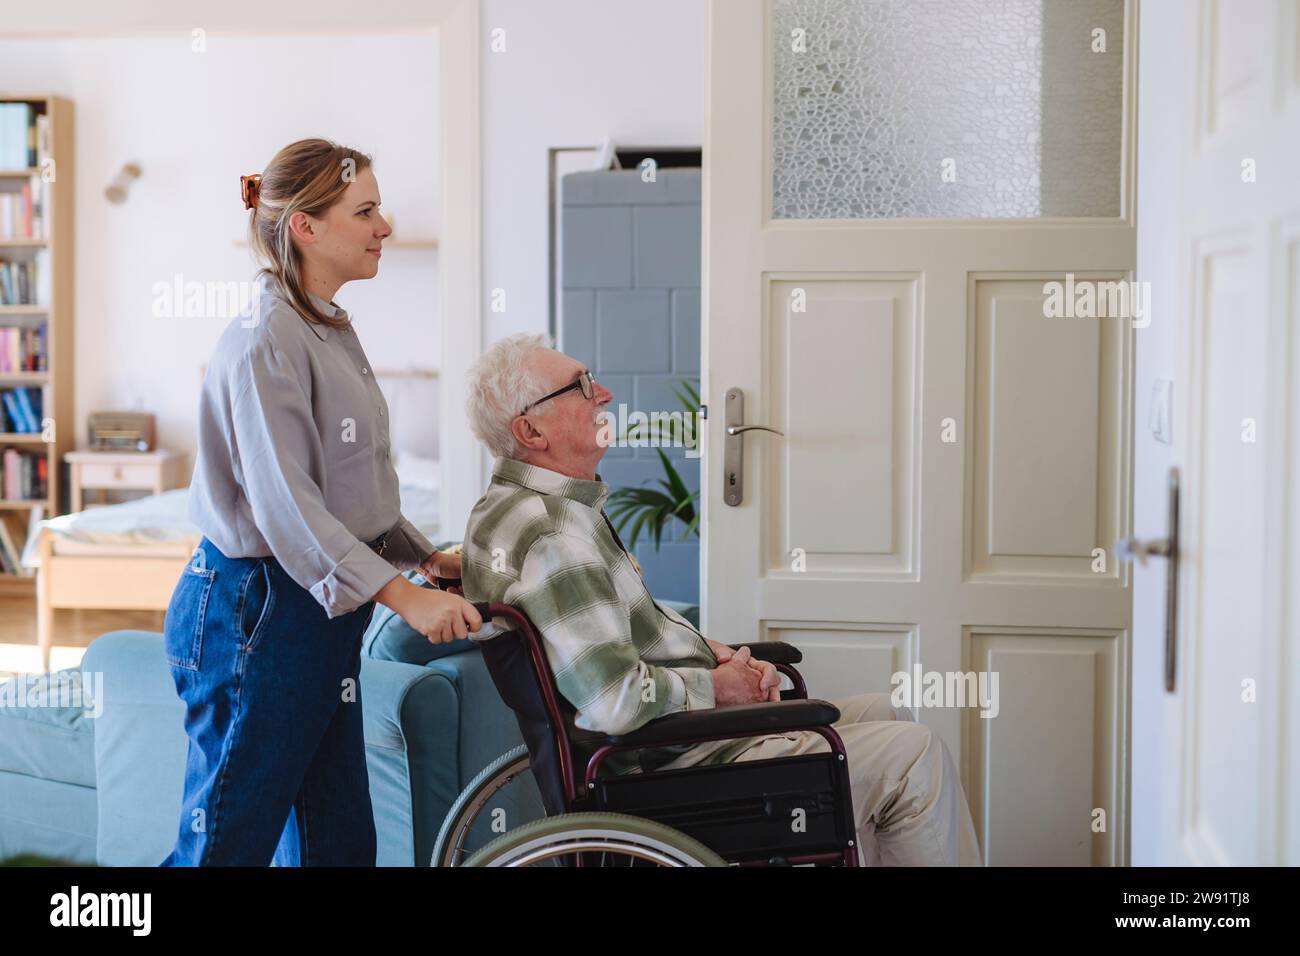 Smiling healthcare worker with man sitting in wheelchair at home Stock Photo